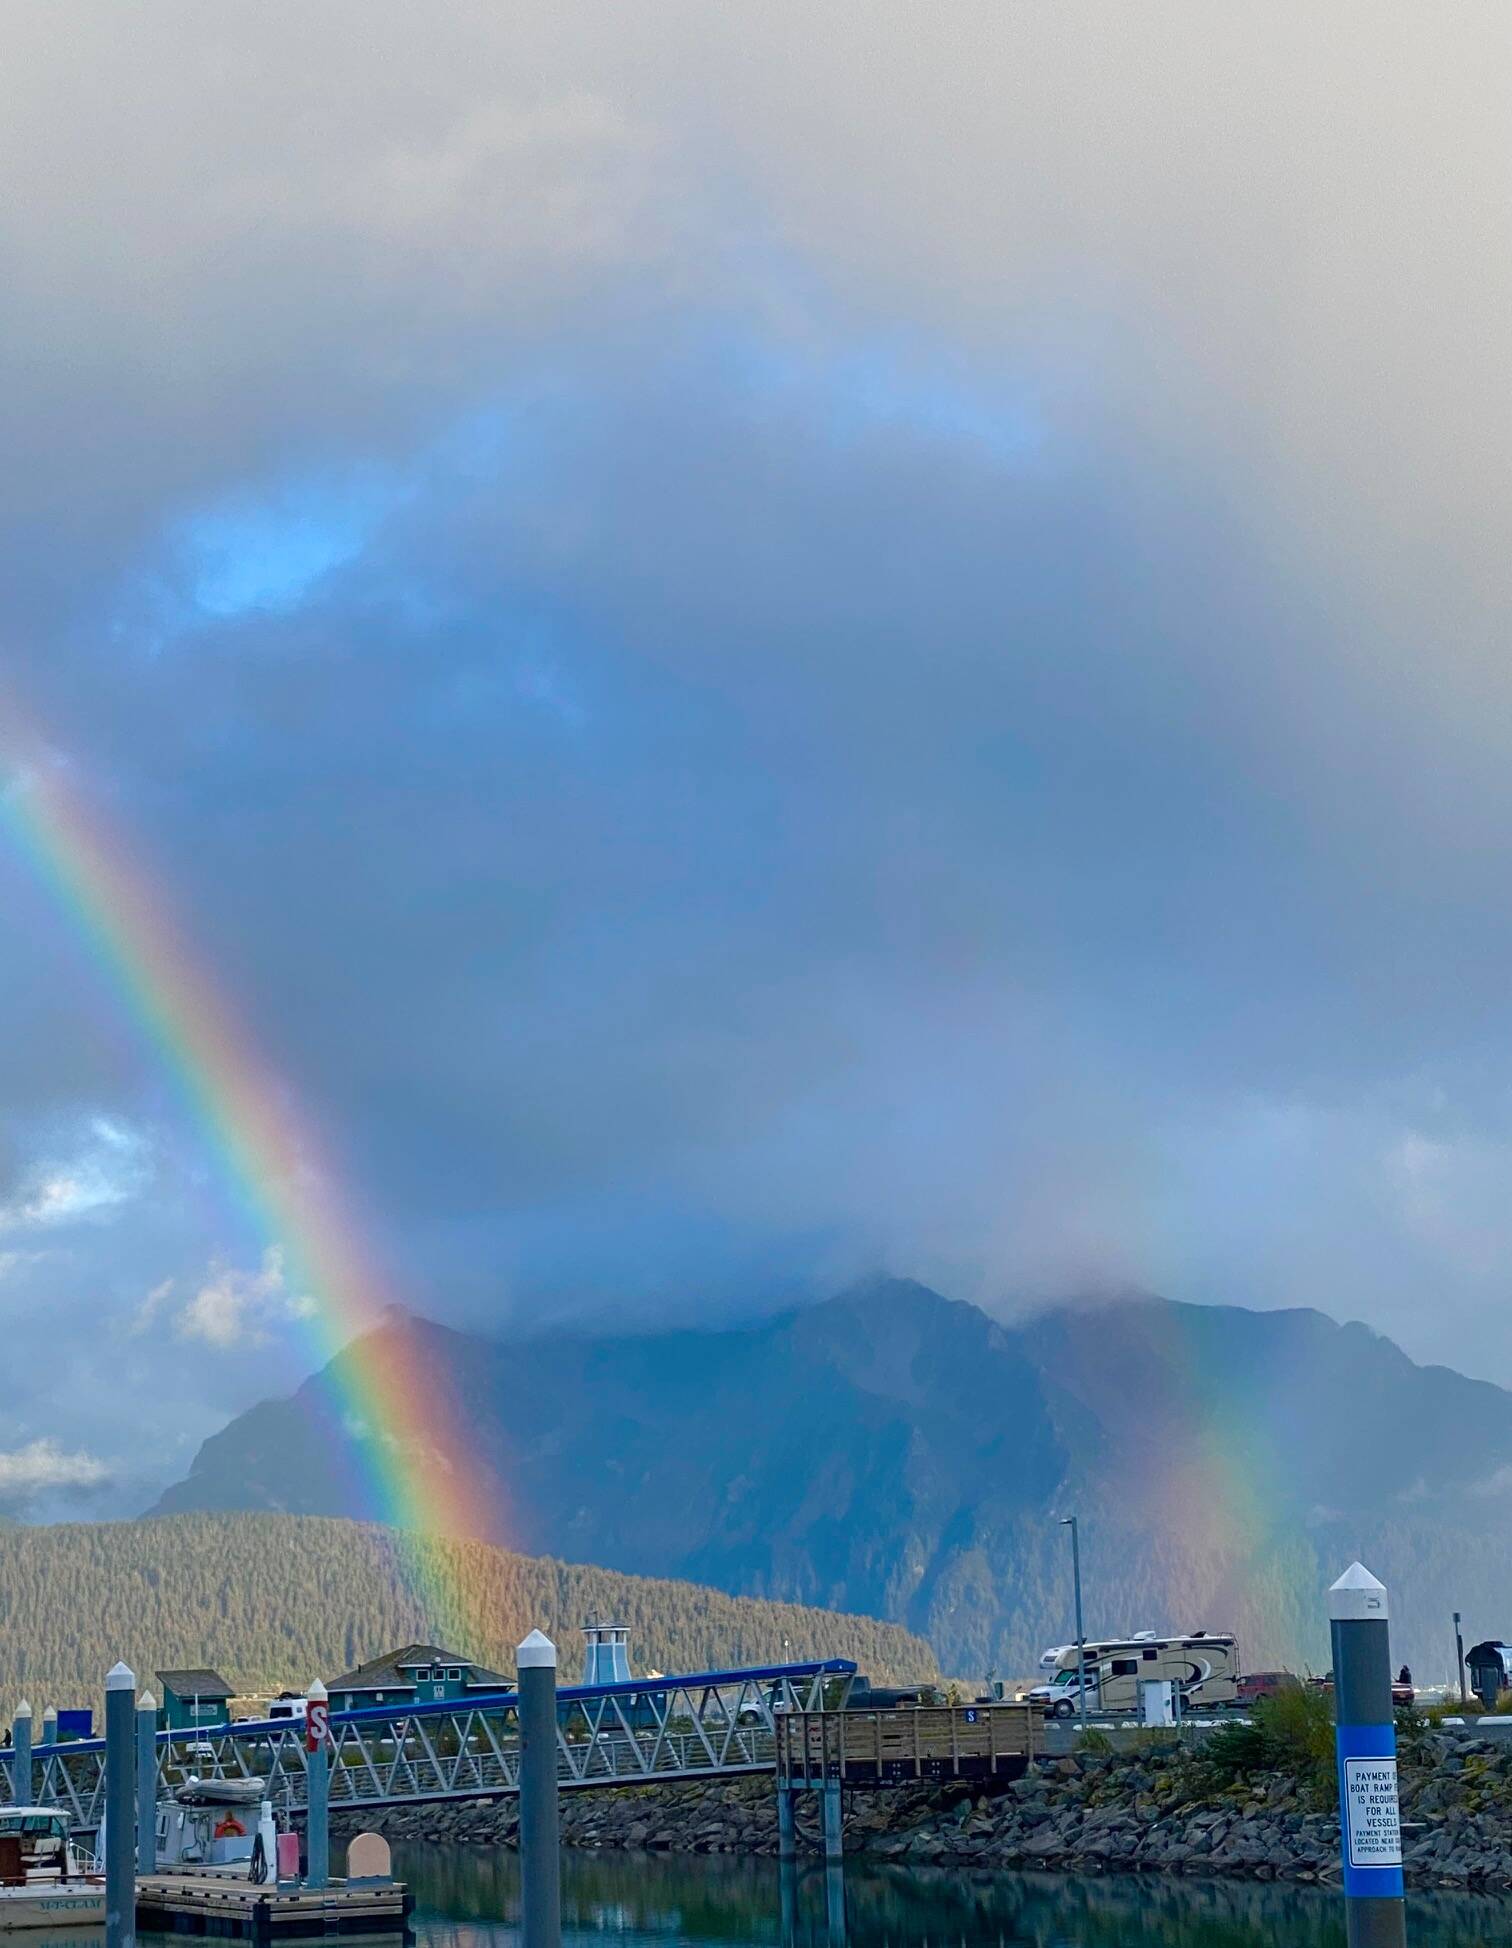 A double rainbow appears over the harbor in downtown Seward on Sept. 21. (Photo by Denise Carroll)